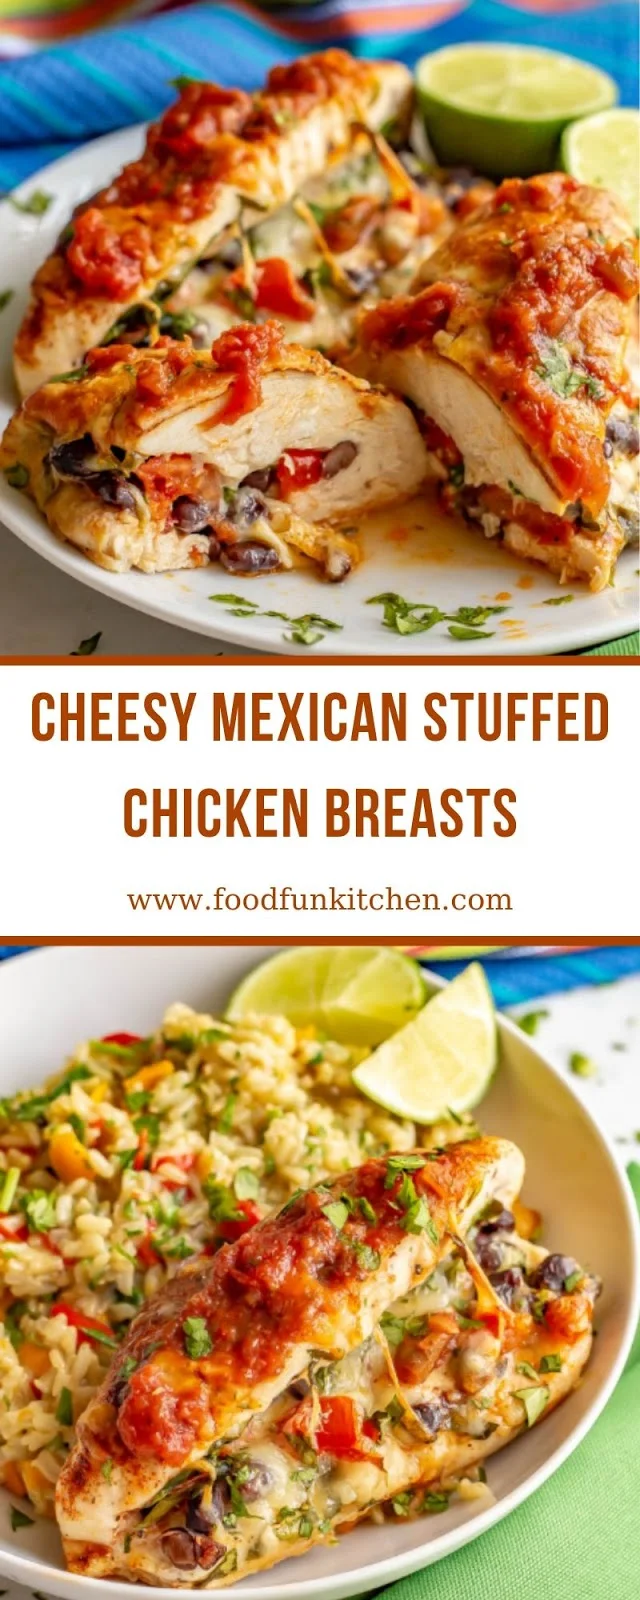 CHEESY MEXICAN STUFFED CHICKEN BREASTS